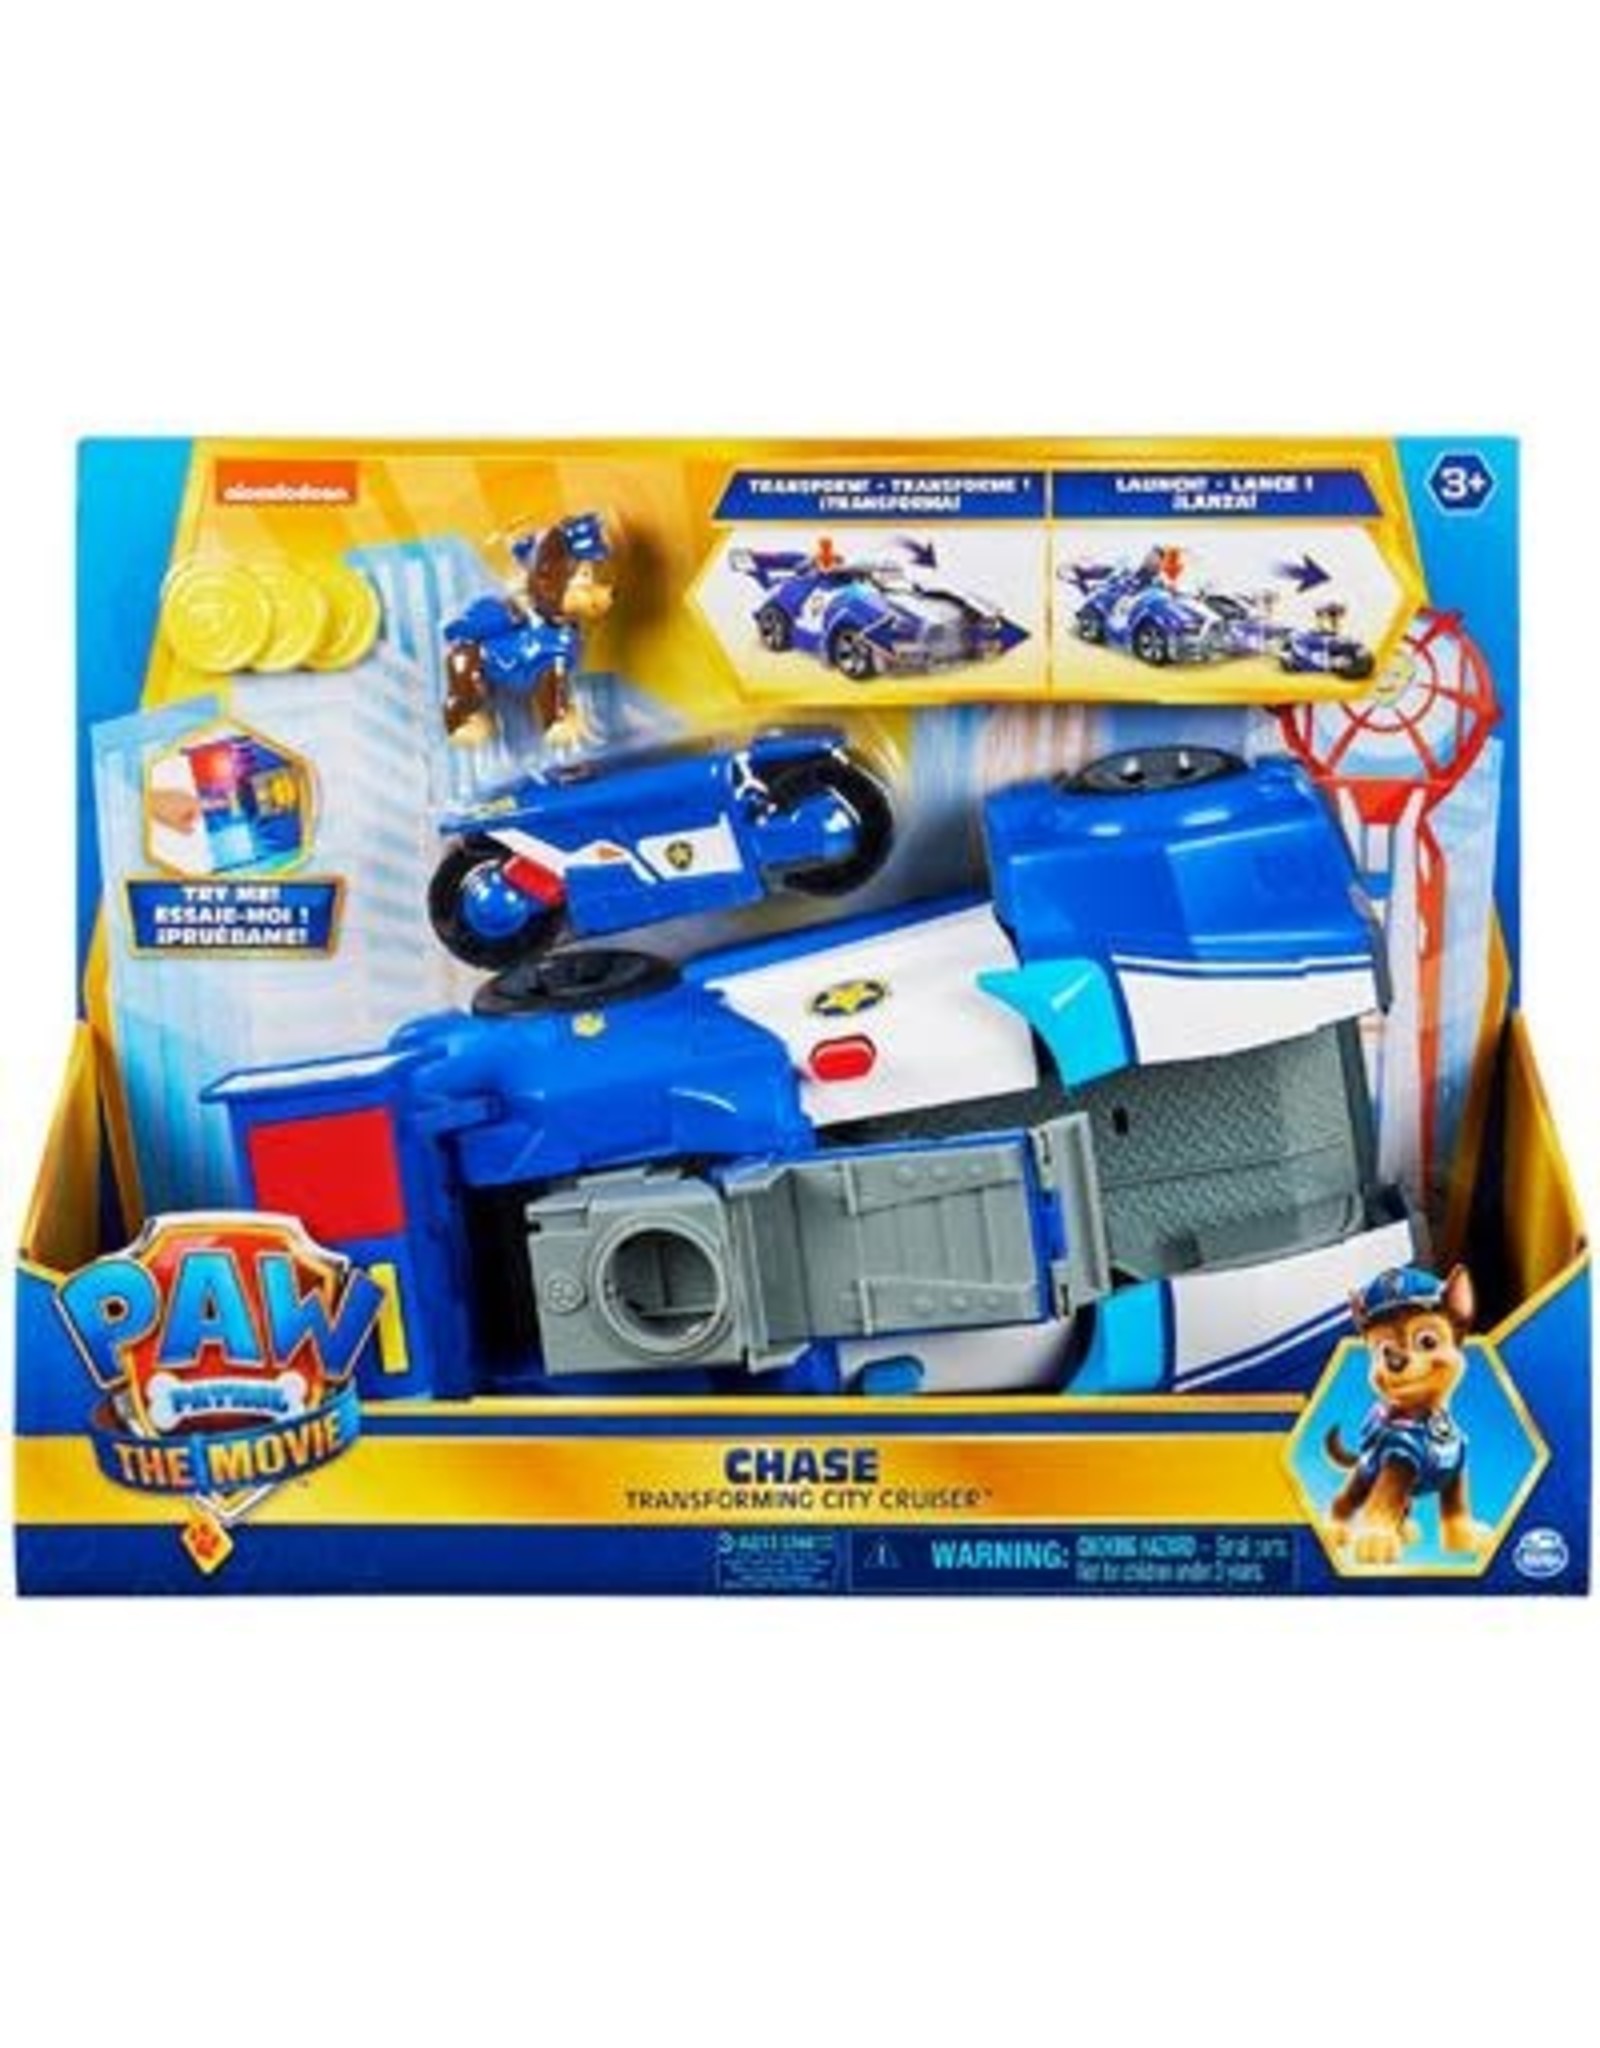 Spin Master Paw Patrol The Movie Chases Deluxe Vehicle